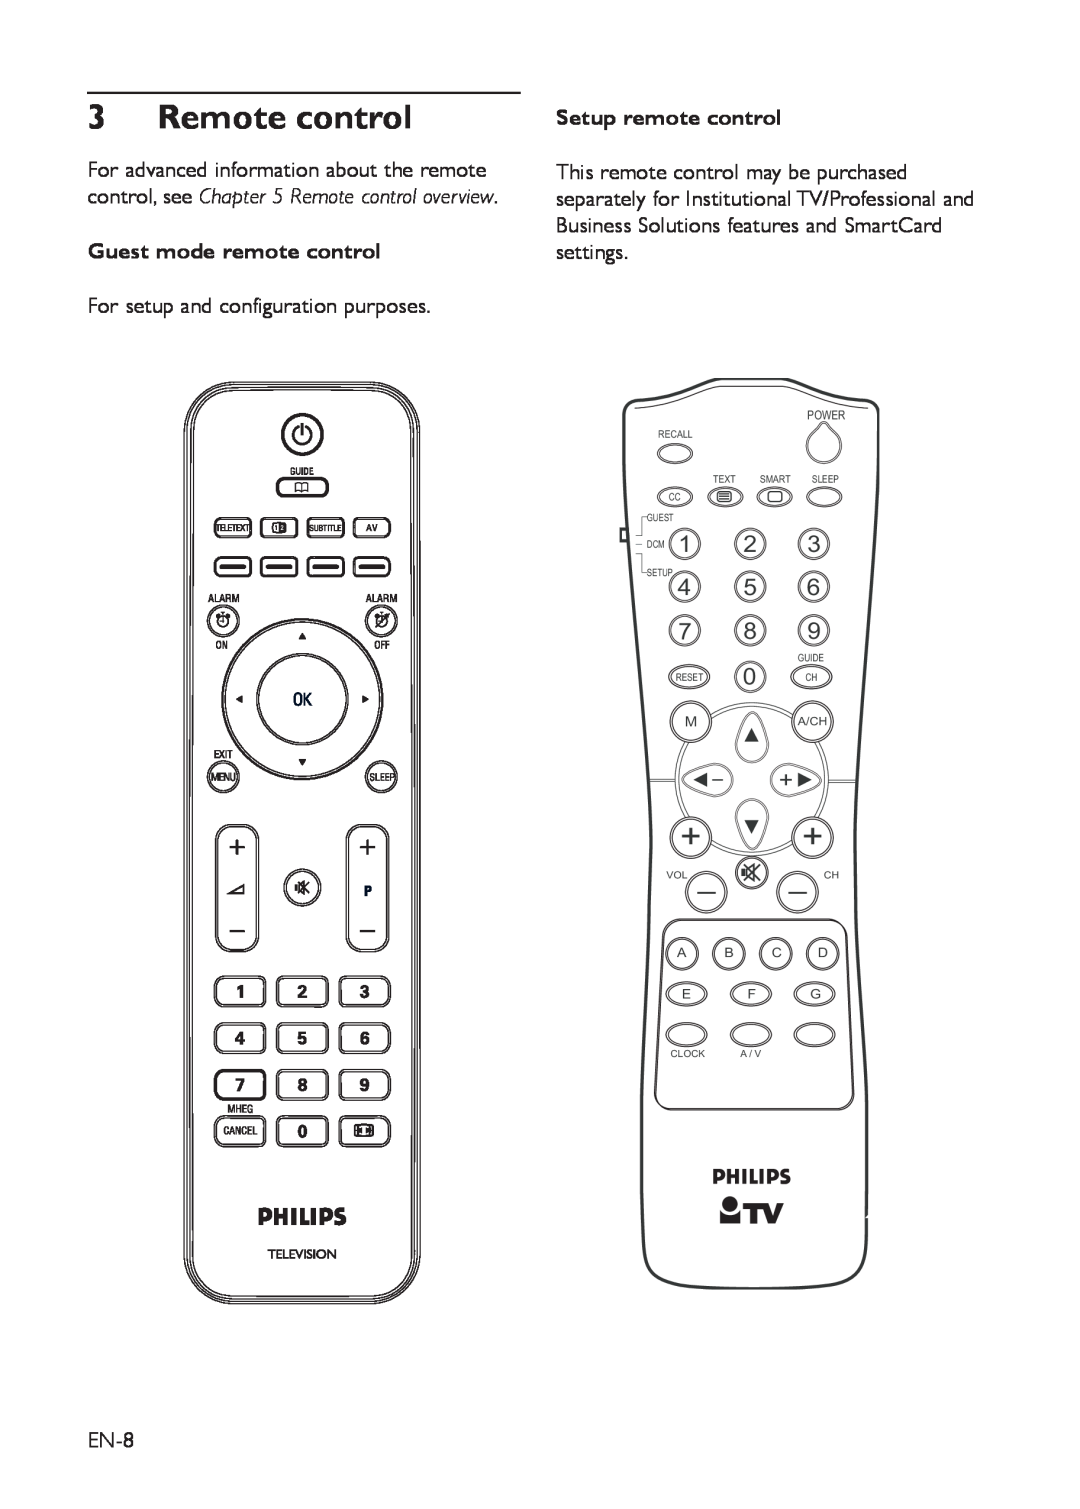 Philips 22HFL3350D Remote control, Guest mode remote control, Setup remote control, Recall, Text, Smart, Guide, Reset 